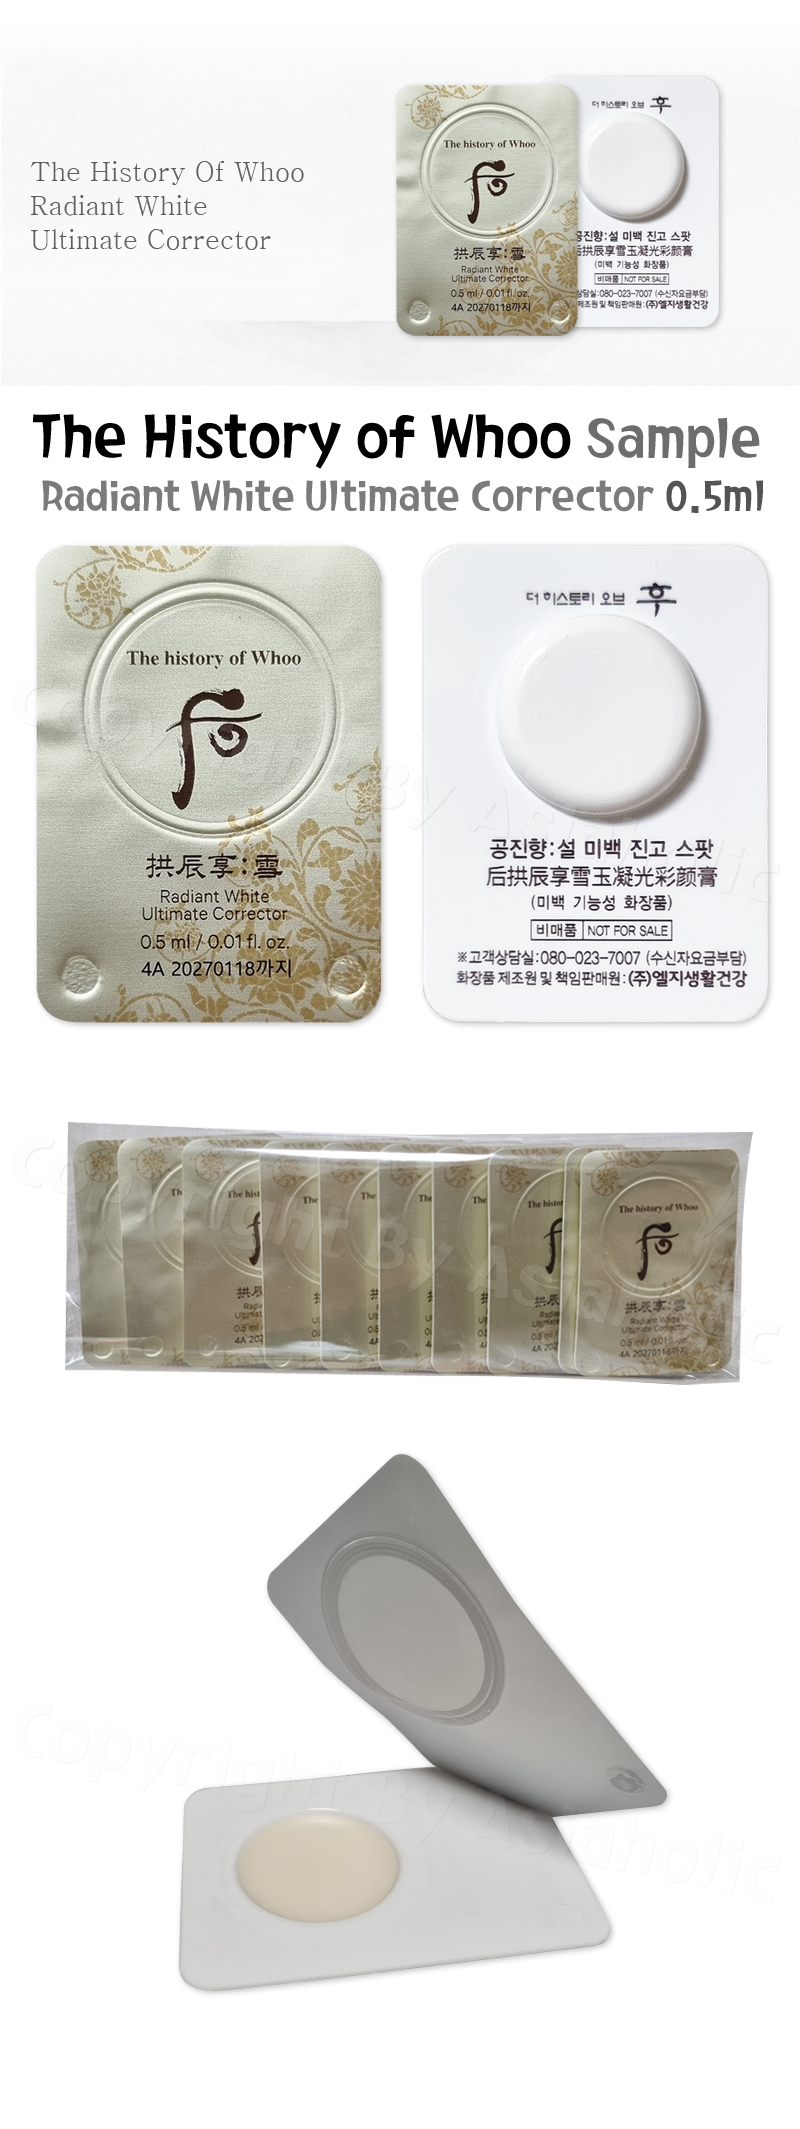 The history of Whoo Radiant White Ultimate Corrector 0.5ml x 25pcs (12.5ml) Sample Newest Version